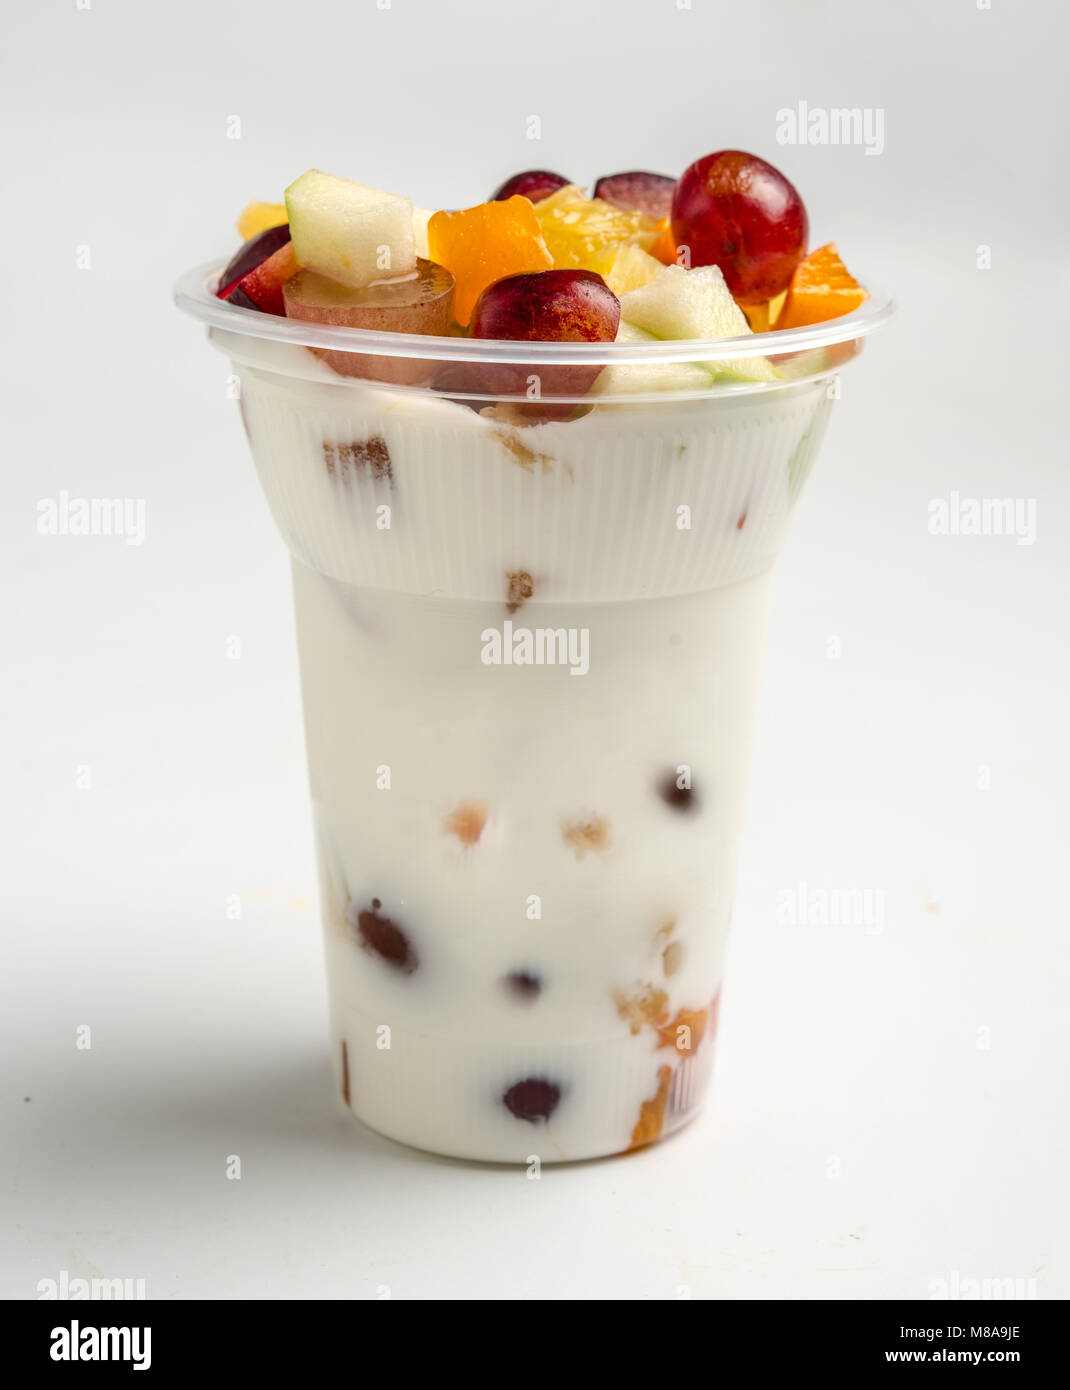 Fruit and yogurt in a plastic cup as a take away snack Stock Photo